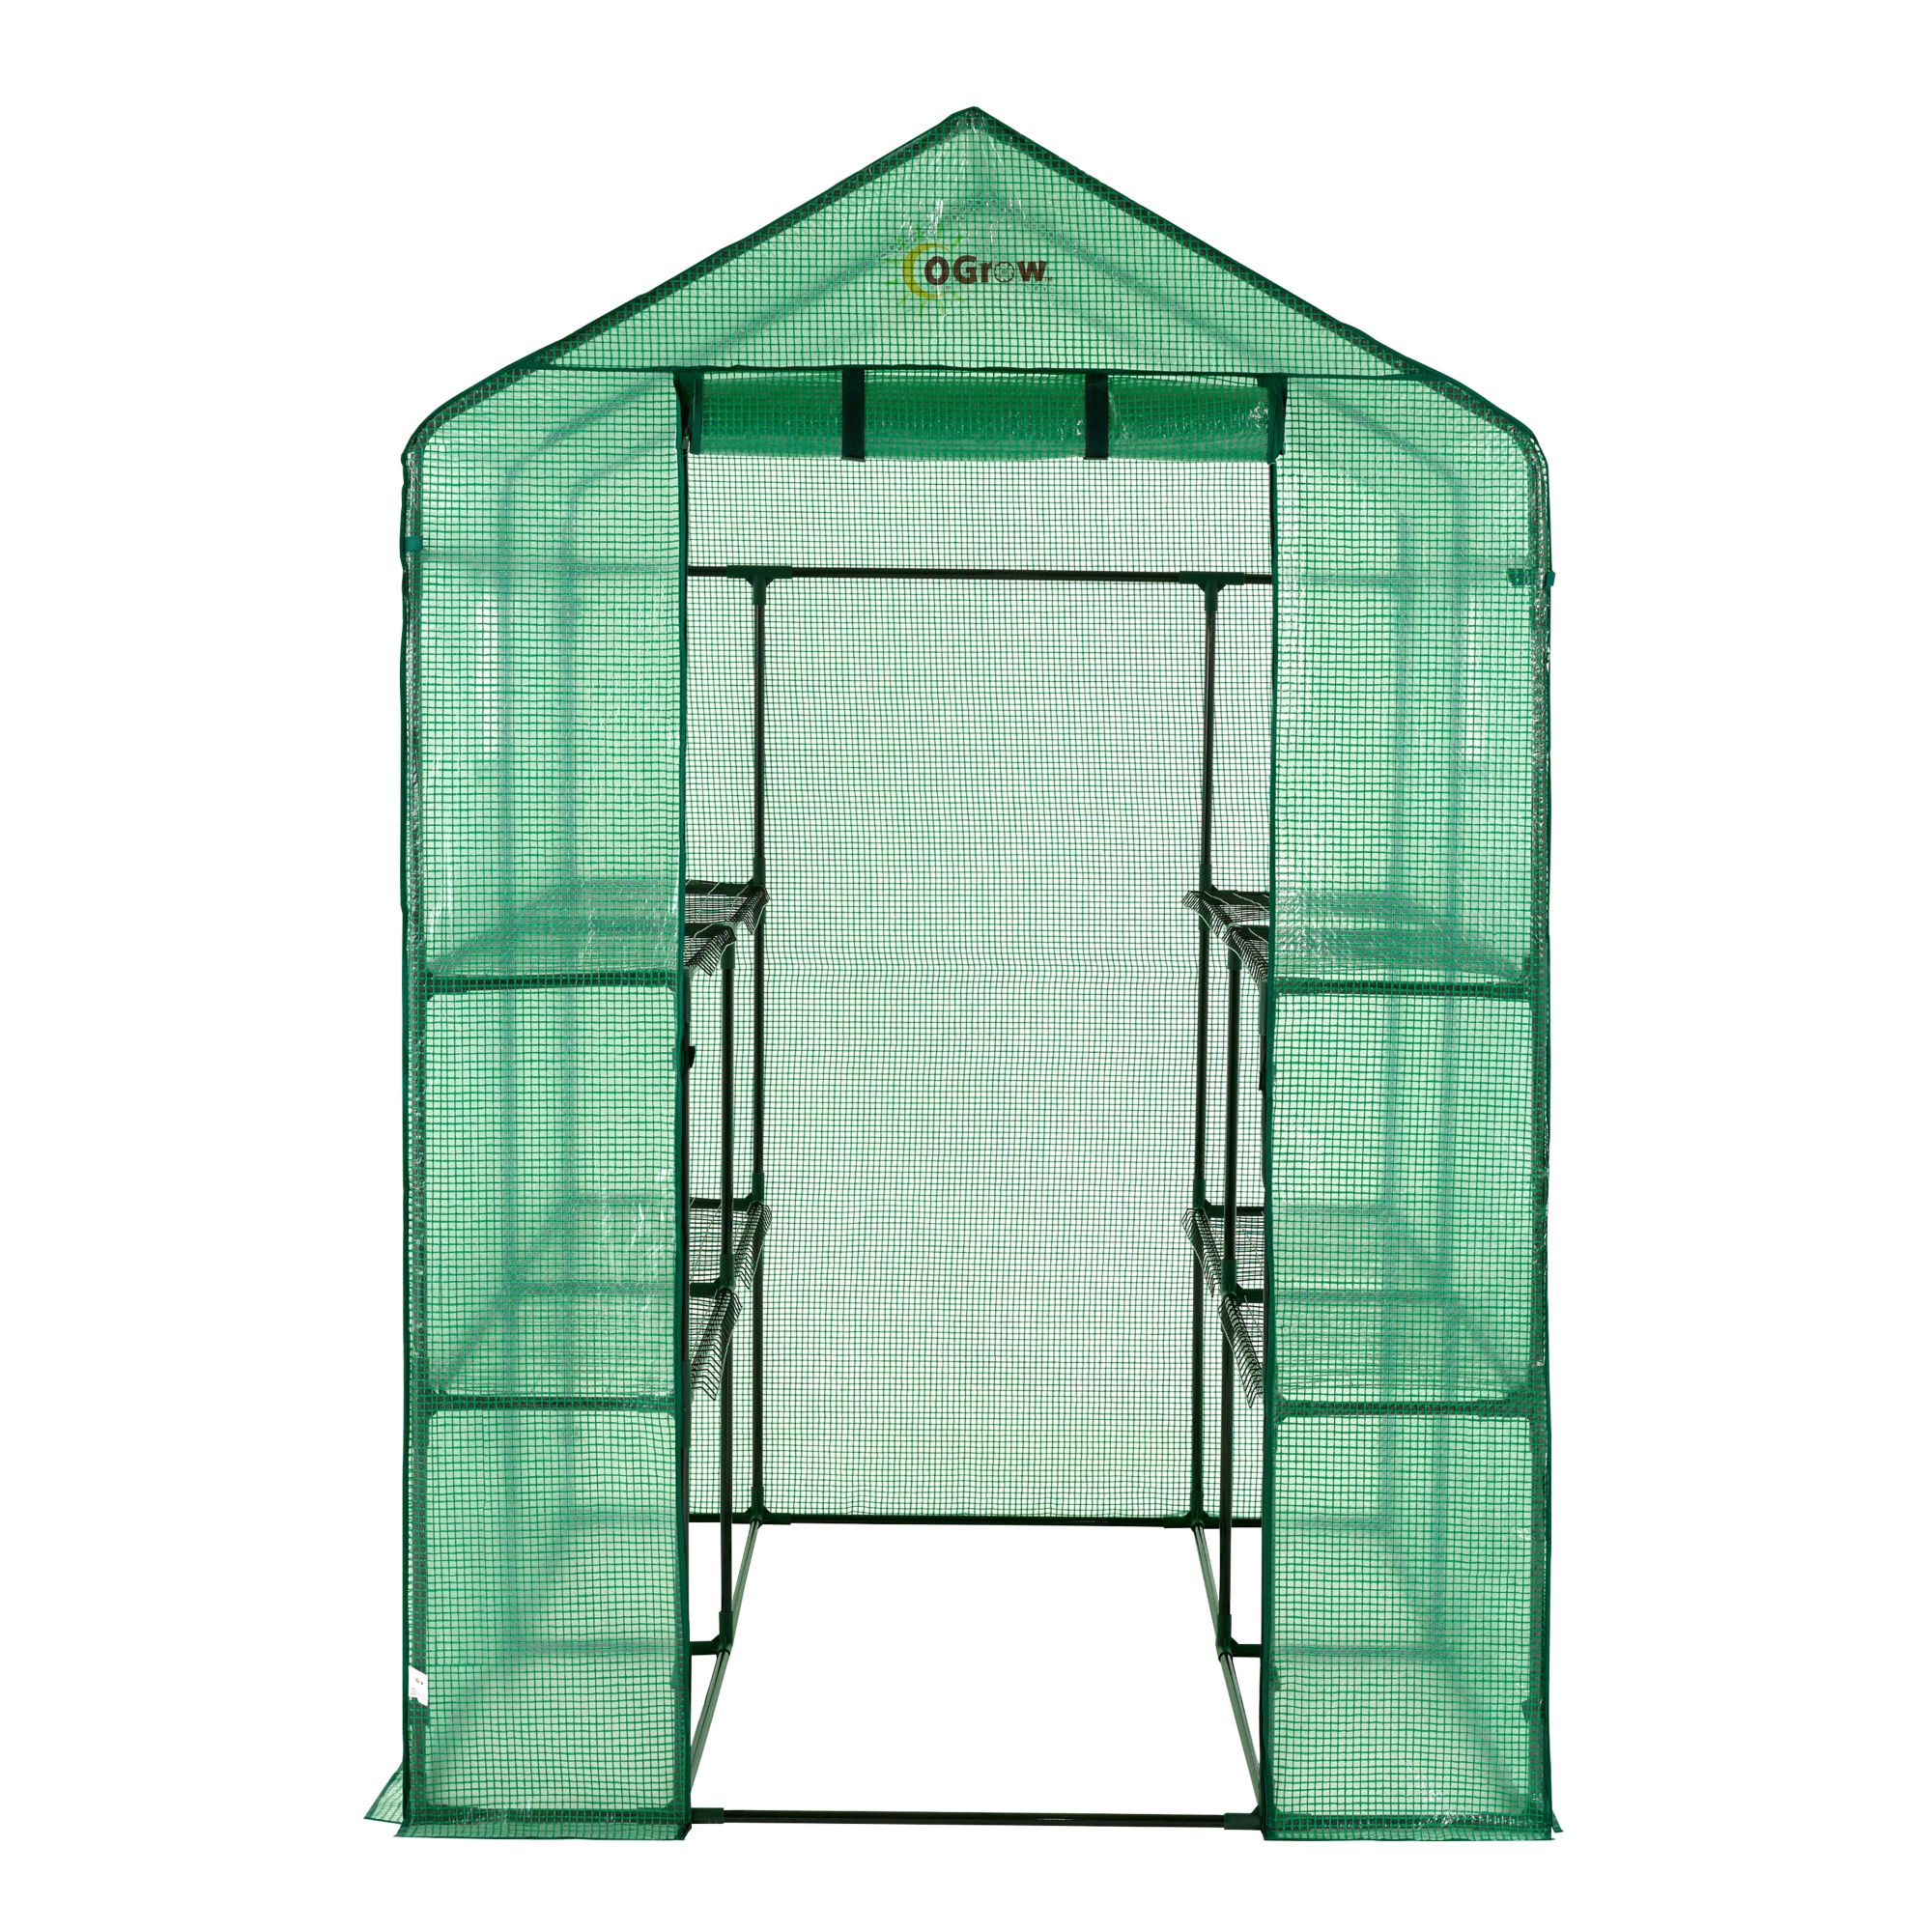 Machrus Ogrow Deluxe Walk-In Greenhouse with 2 Tiers and 8 Shelves - Green Civer